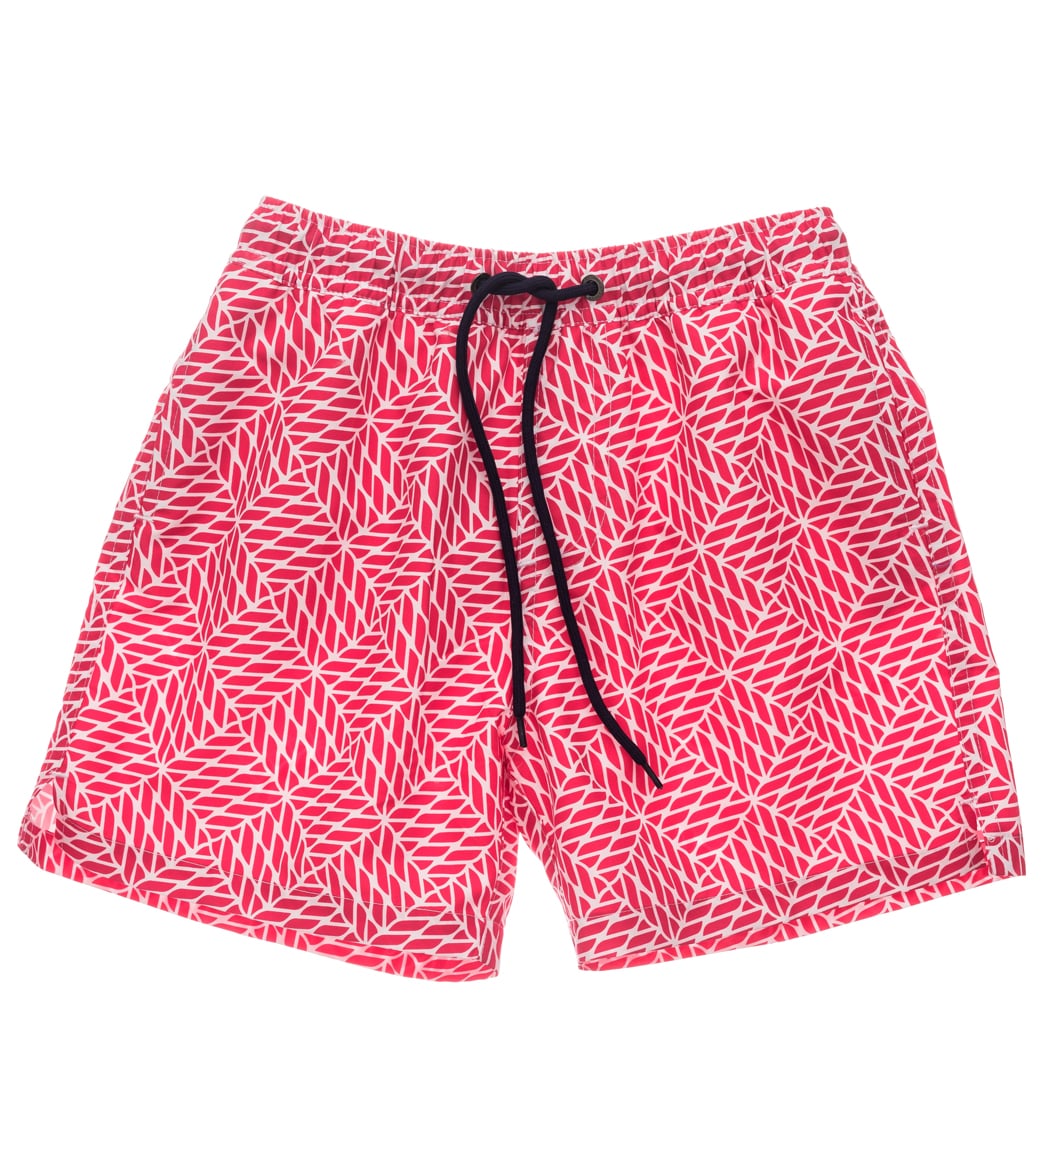 Snapper Rock Boys Nautical Knots Red Volley Board Short (Toddler, Little Kid, Big Kid)